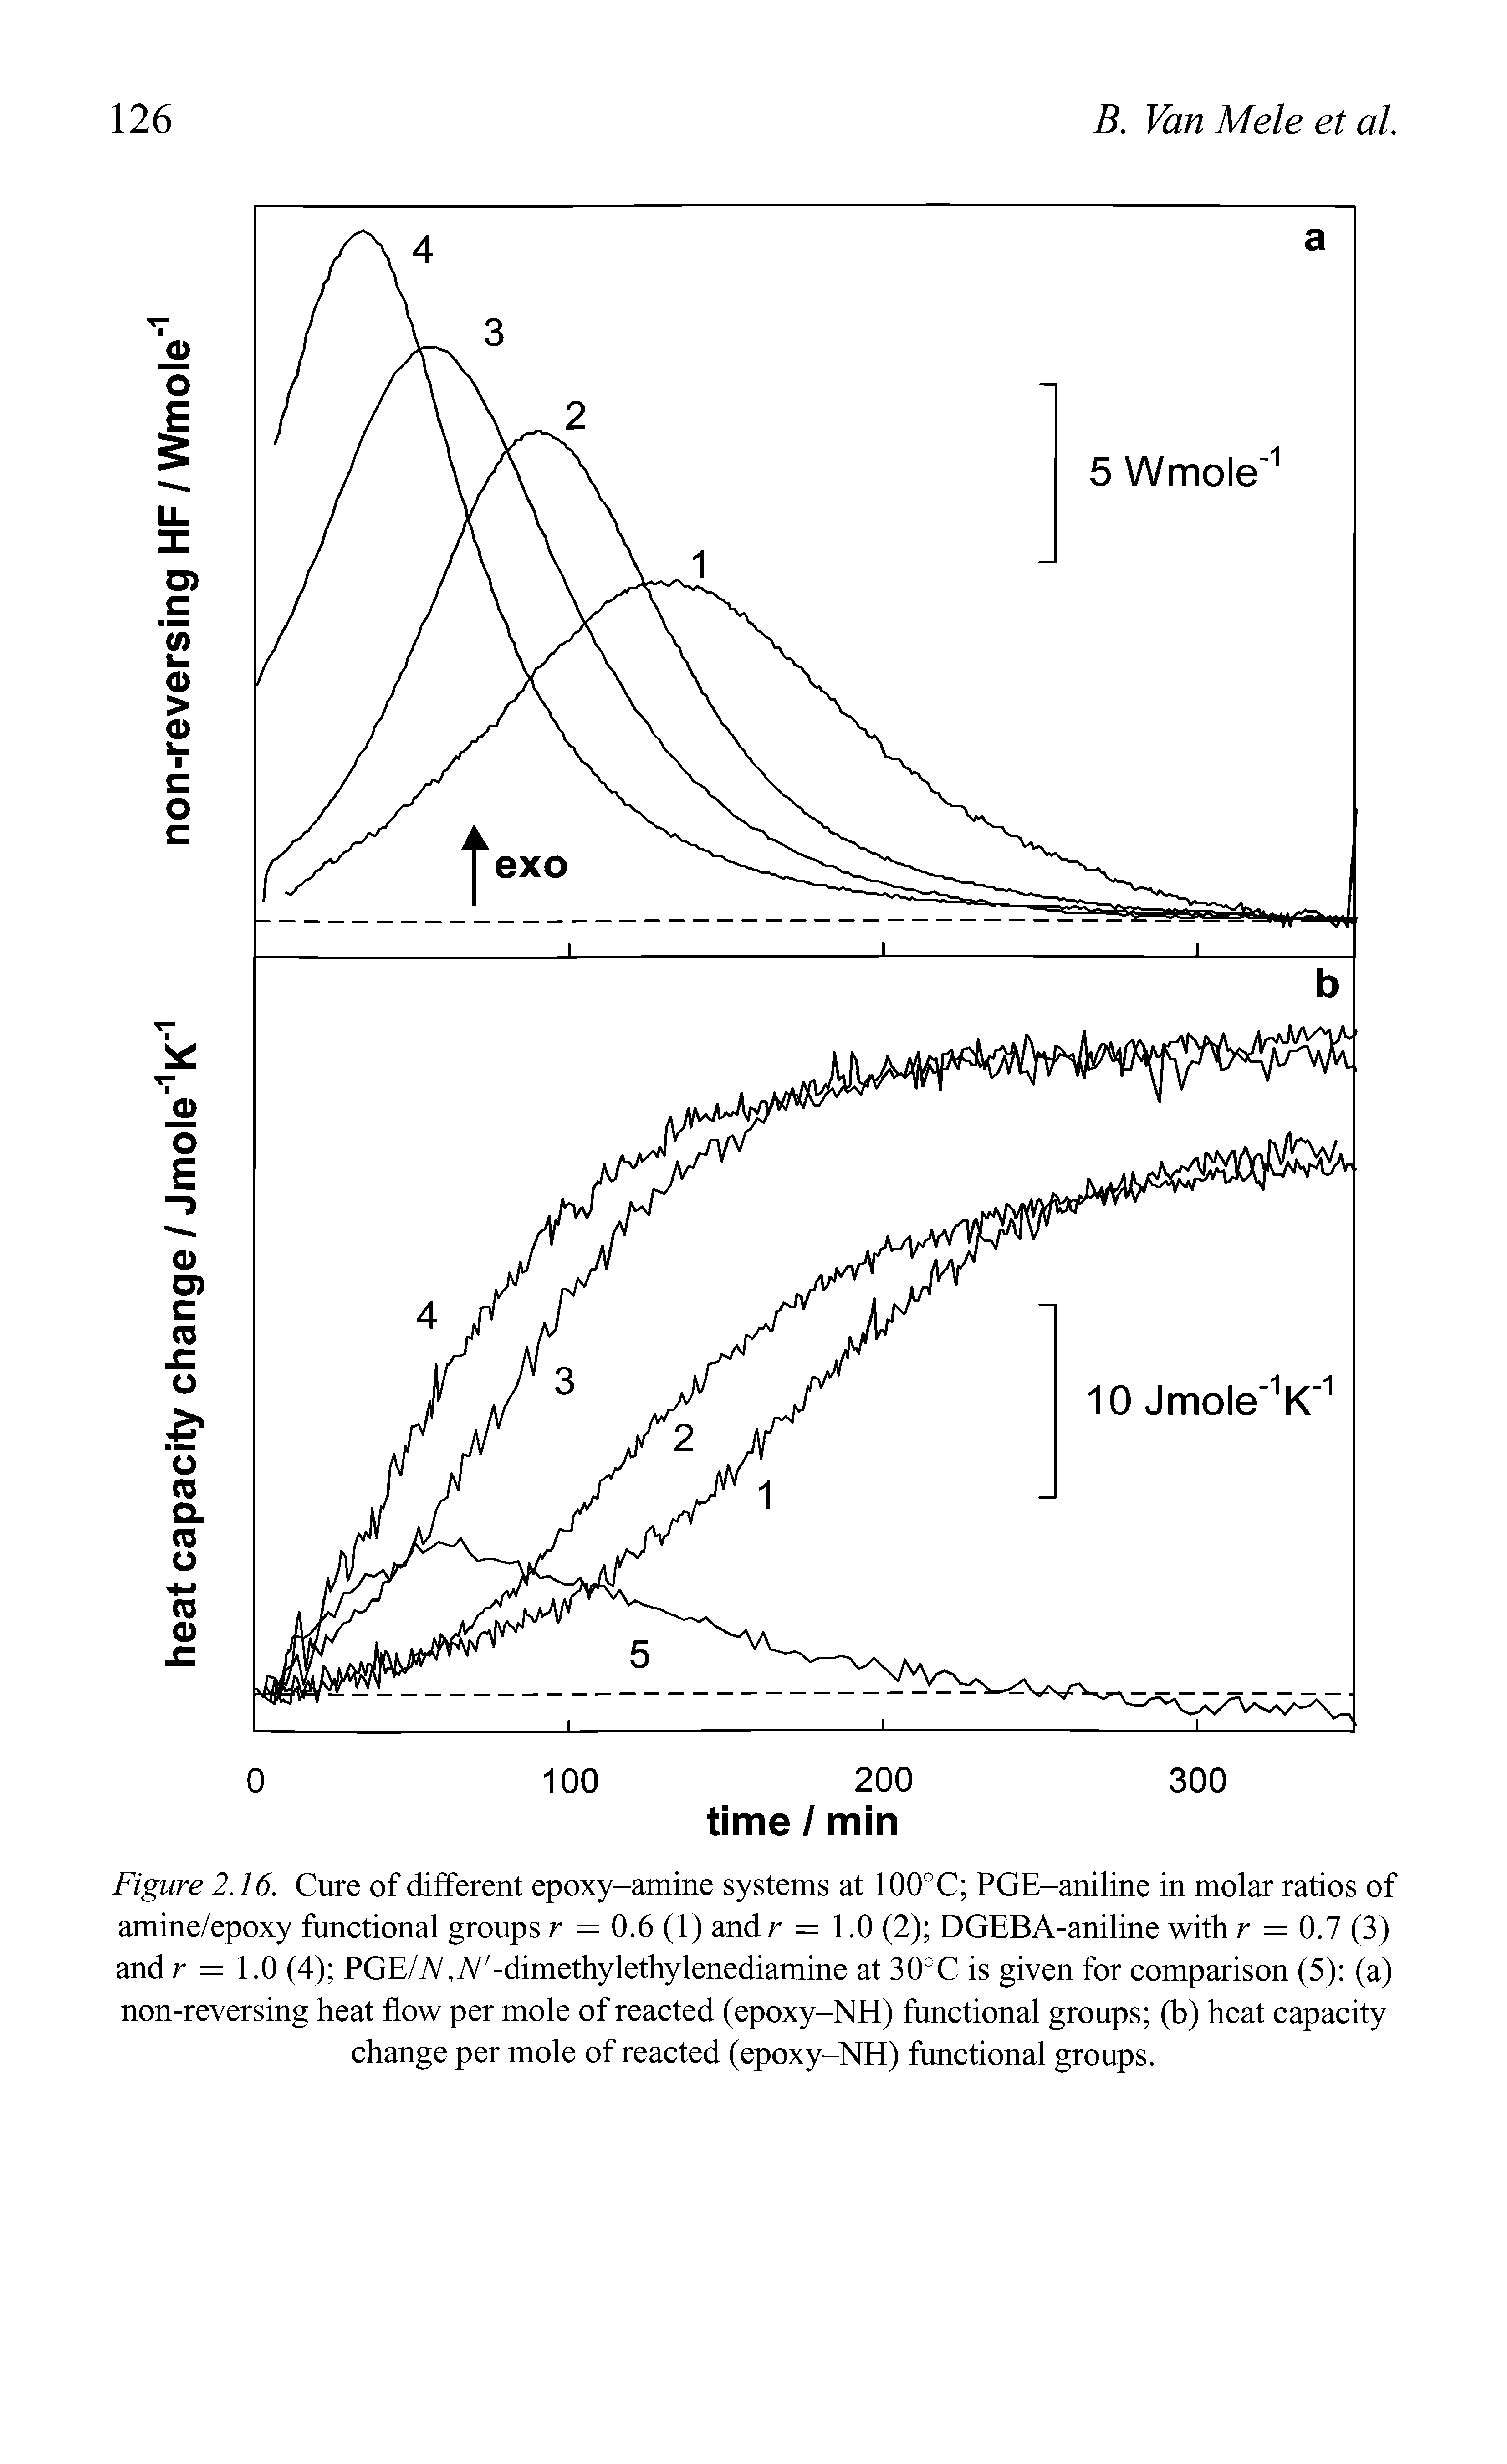 Figure 2.16. Cure of different epoxy-amine systems at 100°C PGE-aniline in molar ratios of amine/epoxy functional groups r = 0.6 (1) andr = 1.0 (2) DGEBA-aniline with r = 0.7 (3) and r = 1.0 (4) PGE/A,A -dimethylethylenediamine at 30°C is given for comparison (5) (a) non-reversing heat flow per mole of reacted (epoxy-NH) functional groups (b) heat capacity change per mole of reacted (epoxy-NH) functional groups.